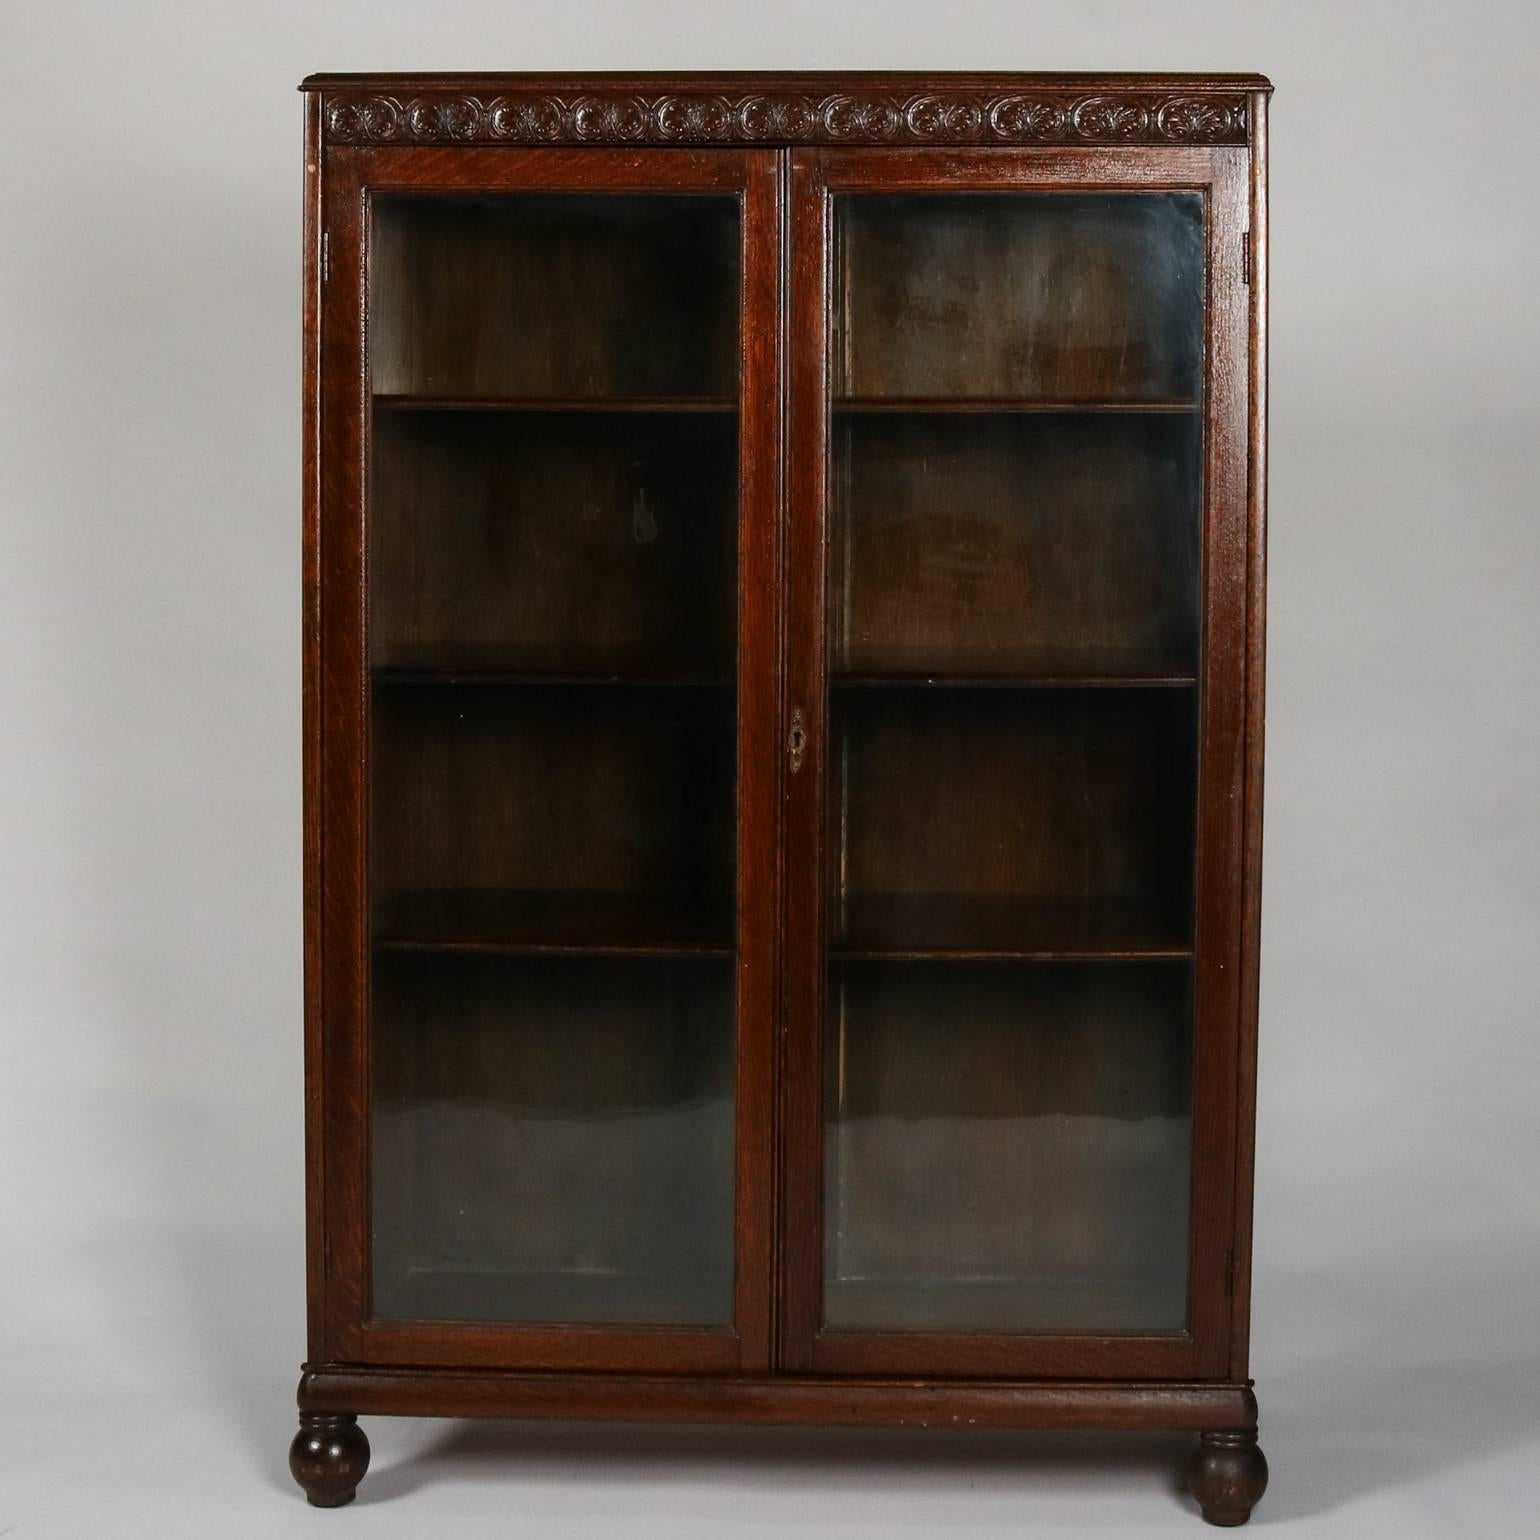 Antique oak bookcase by Horner Bros. features carved scroll and foliate trim, two glass doors, interior shelving, and is seated on ball feet, 19th century.

Measures: 53.5" H x 35.5" W x 13.5" D.